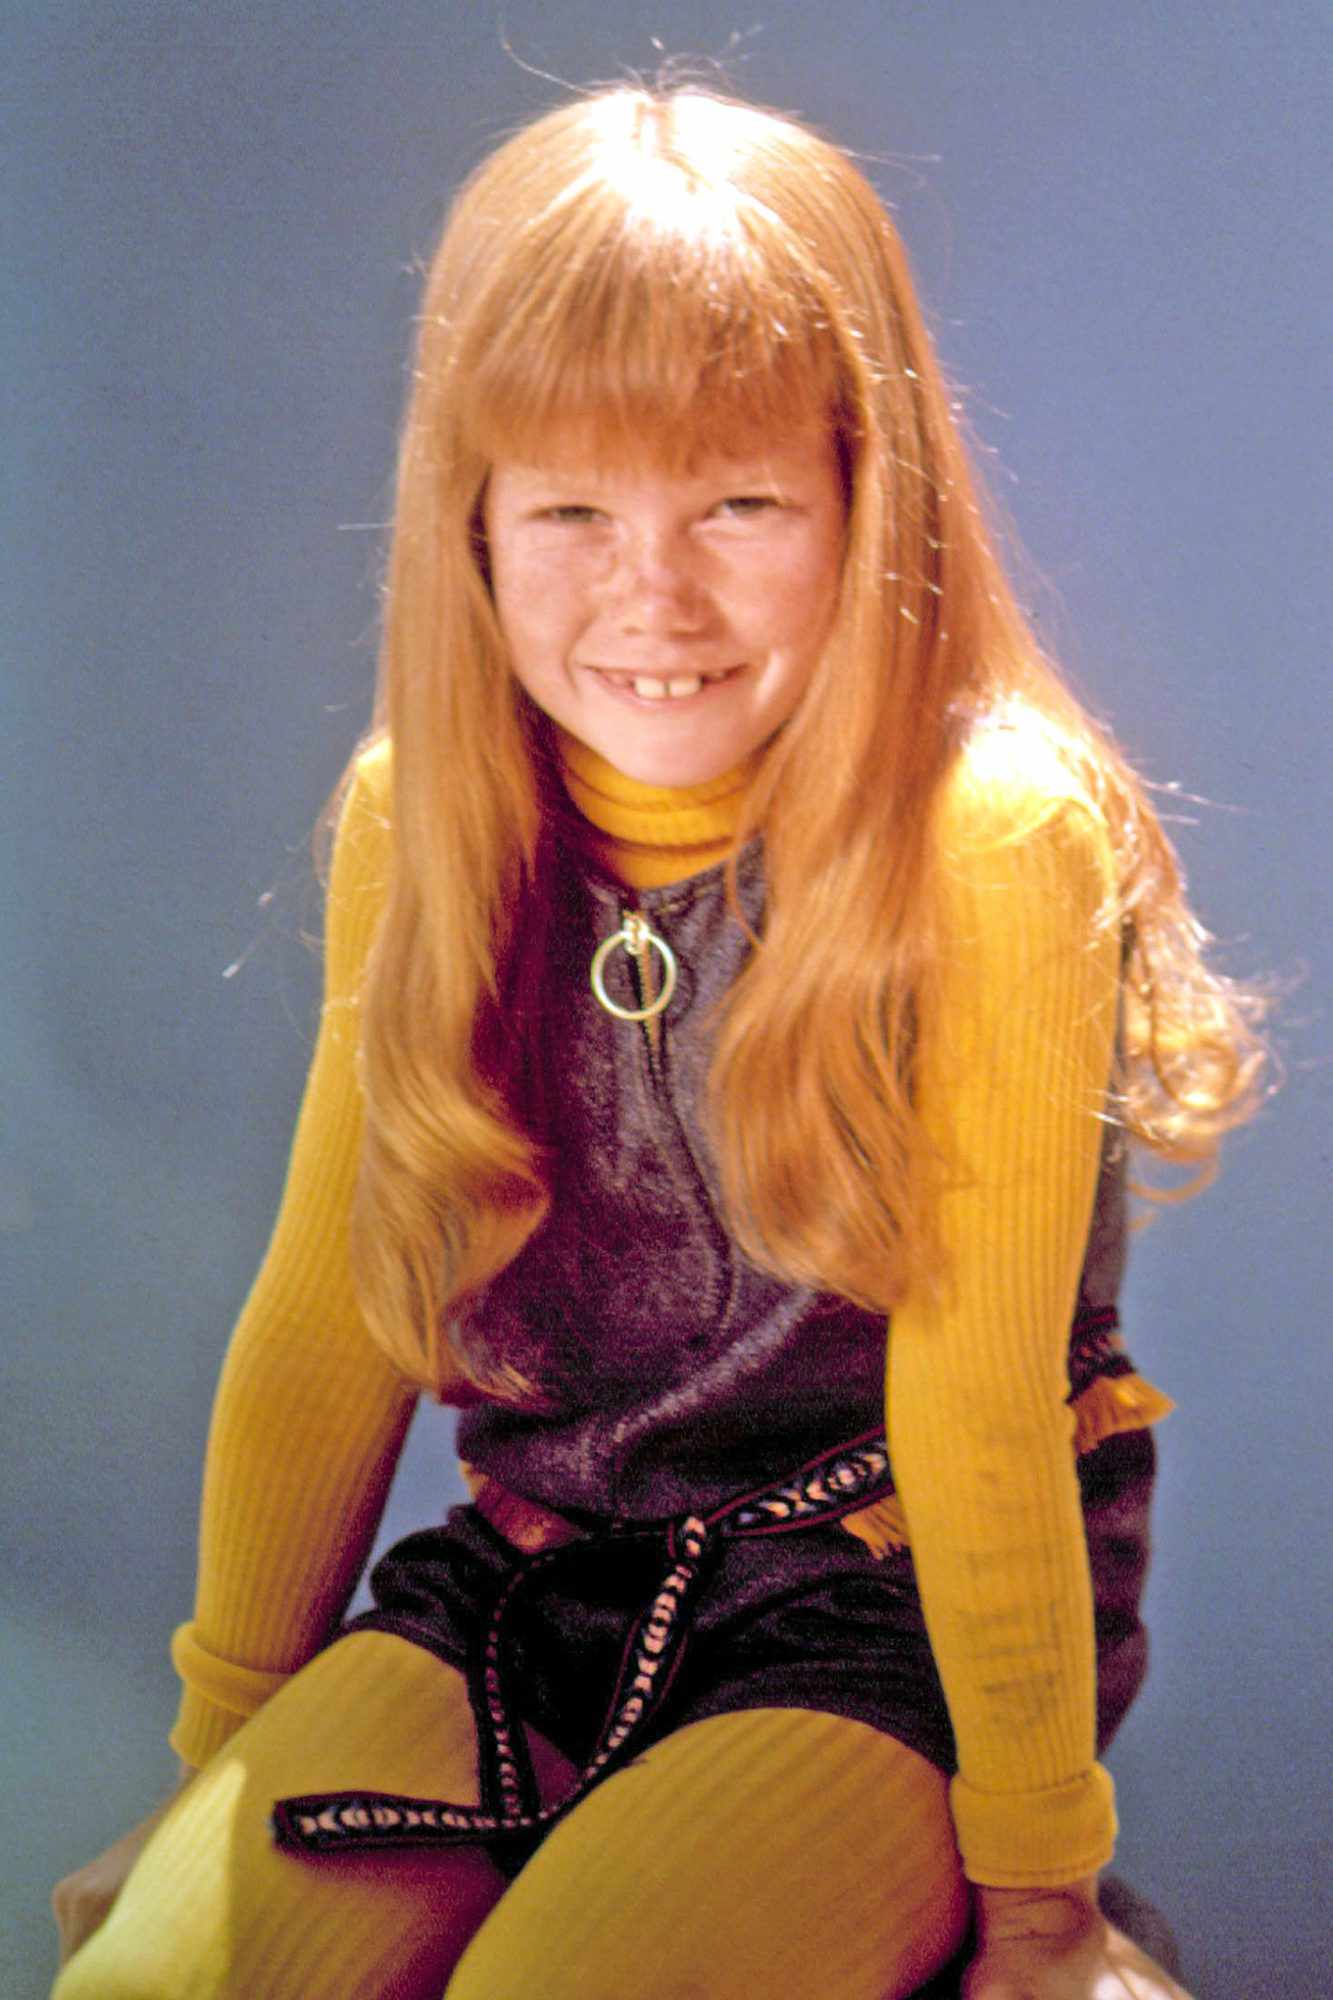 Suzanne Crough dead: Youngest Partridge Family actress dies at 52 | EW.com